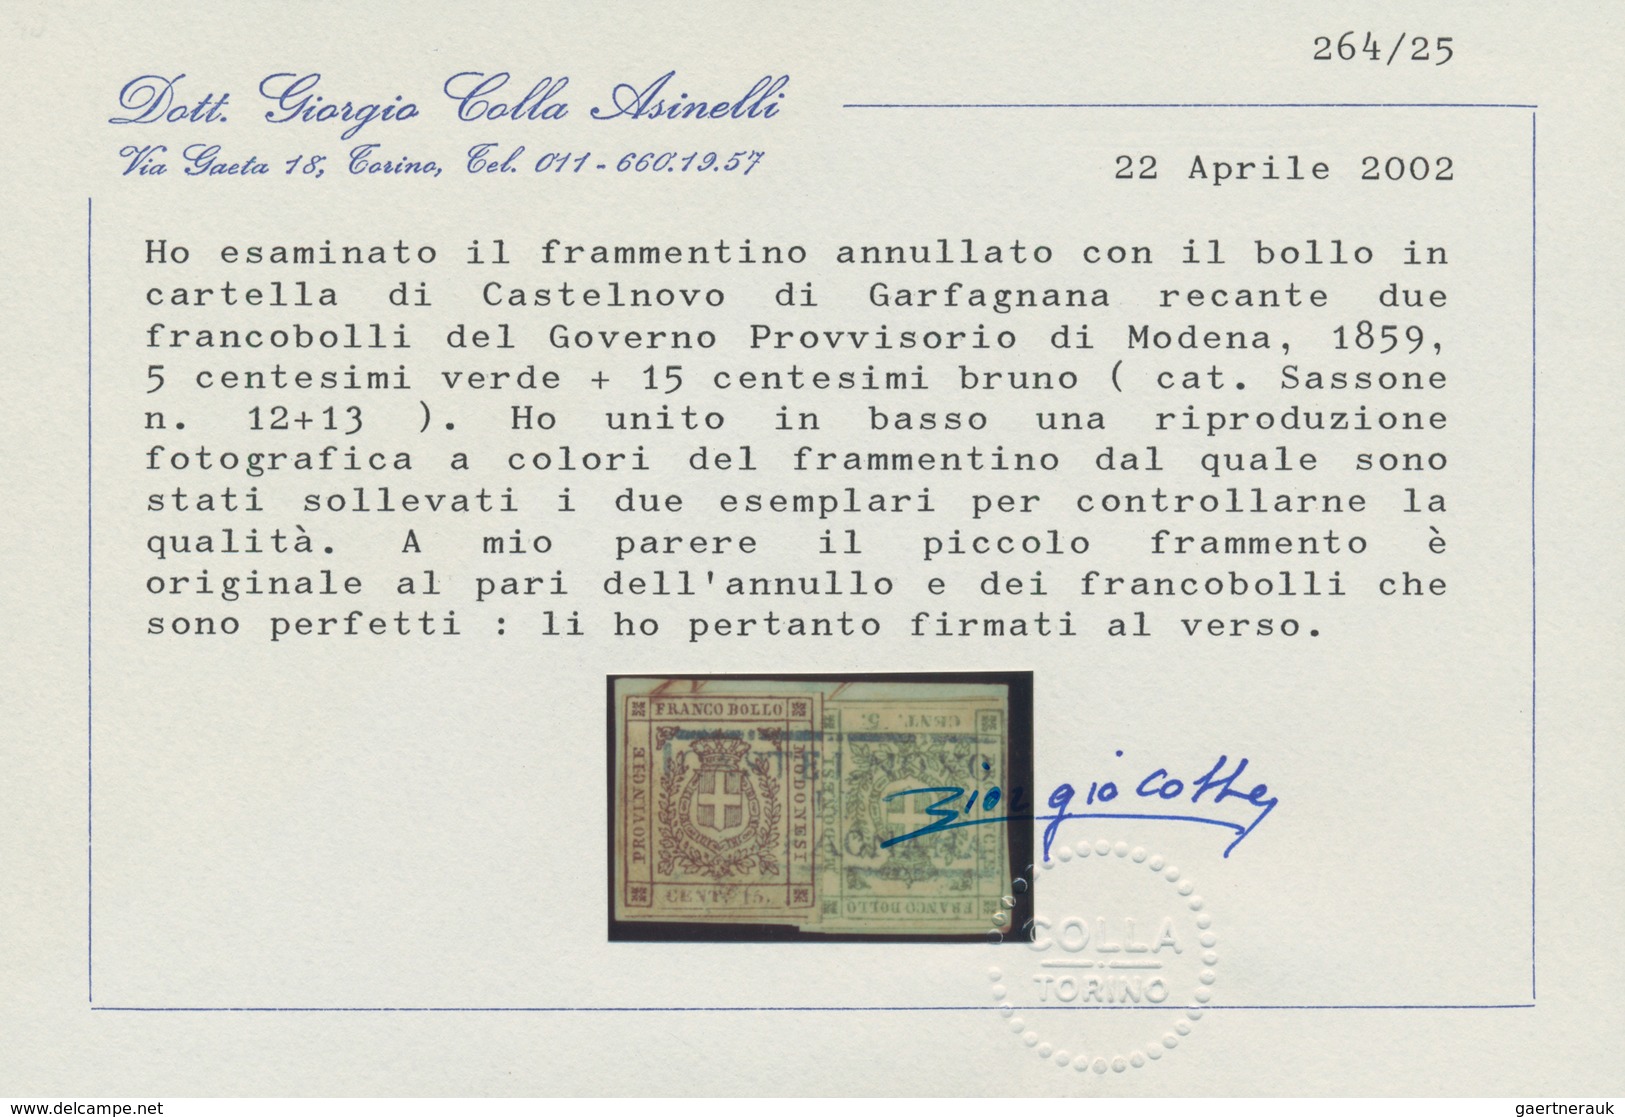 00737 Italien - Altitalienische Staaten: Modena: 1859: Provisional Government, 5 Cents And 15 Cents, Cance - Modena